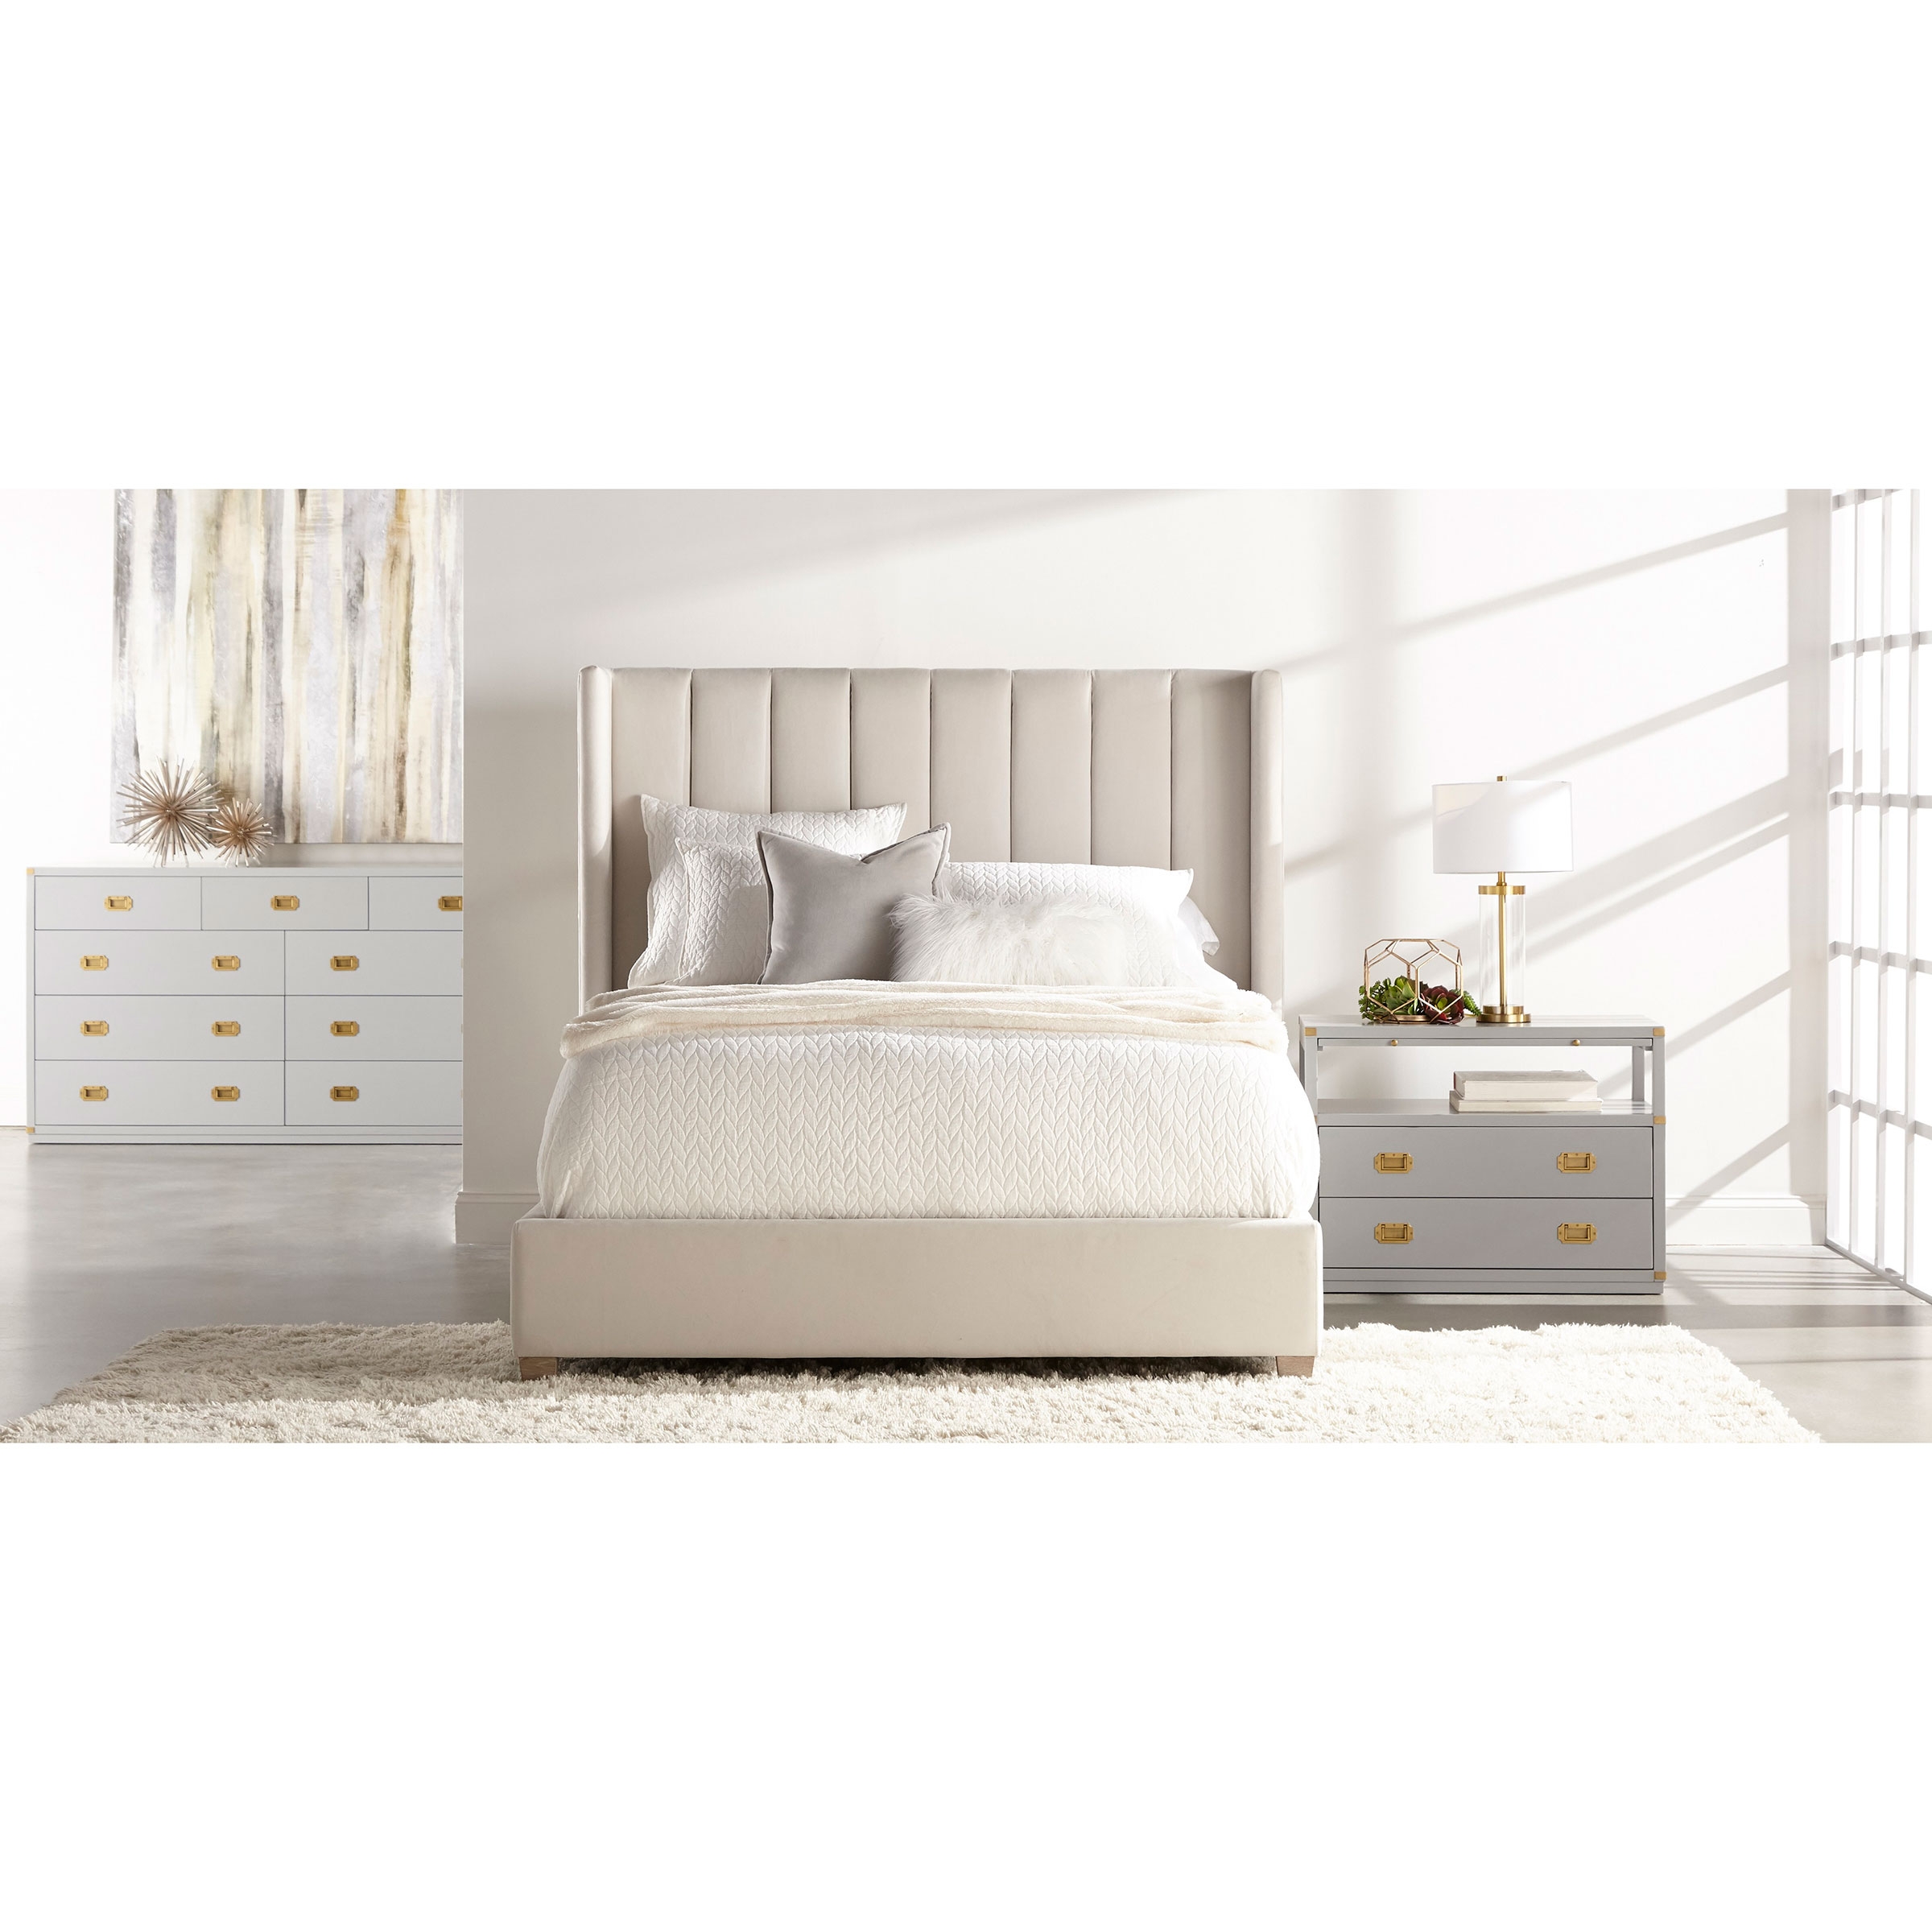 Bobby Modern Classic 2-Drawer Brushed Gold Pulls Dove Grey Nightstand - Image 4